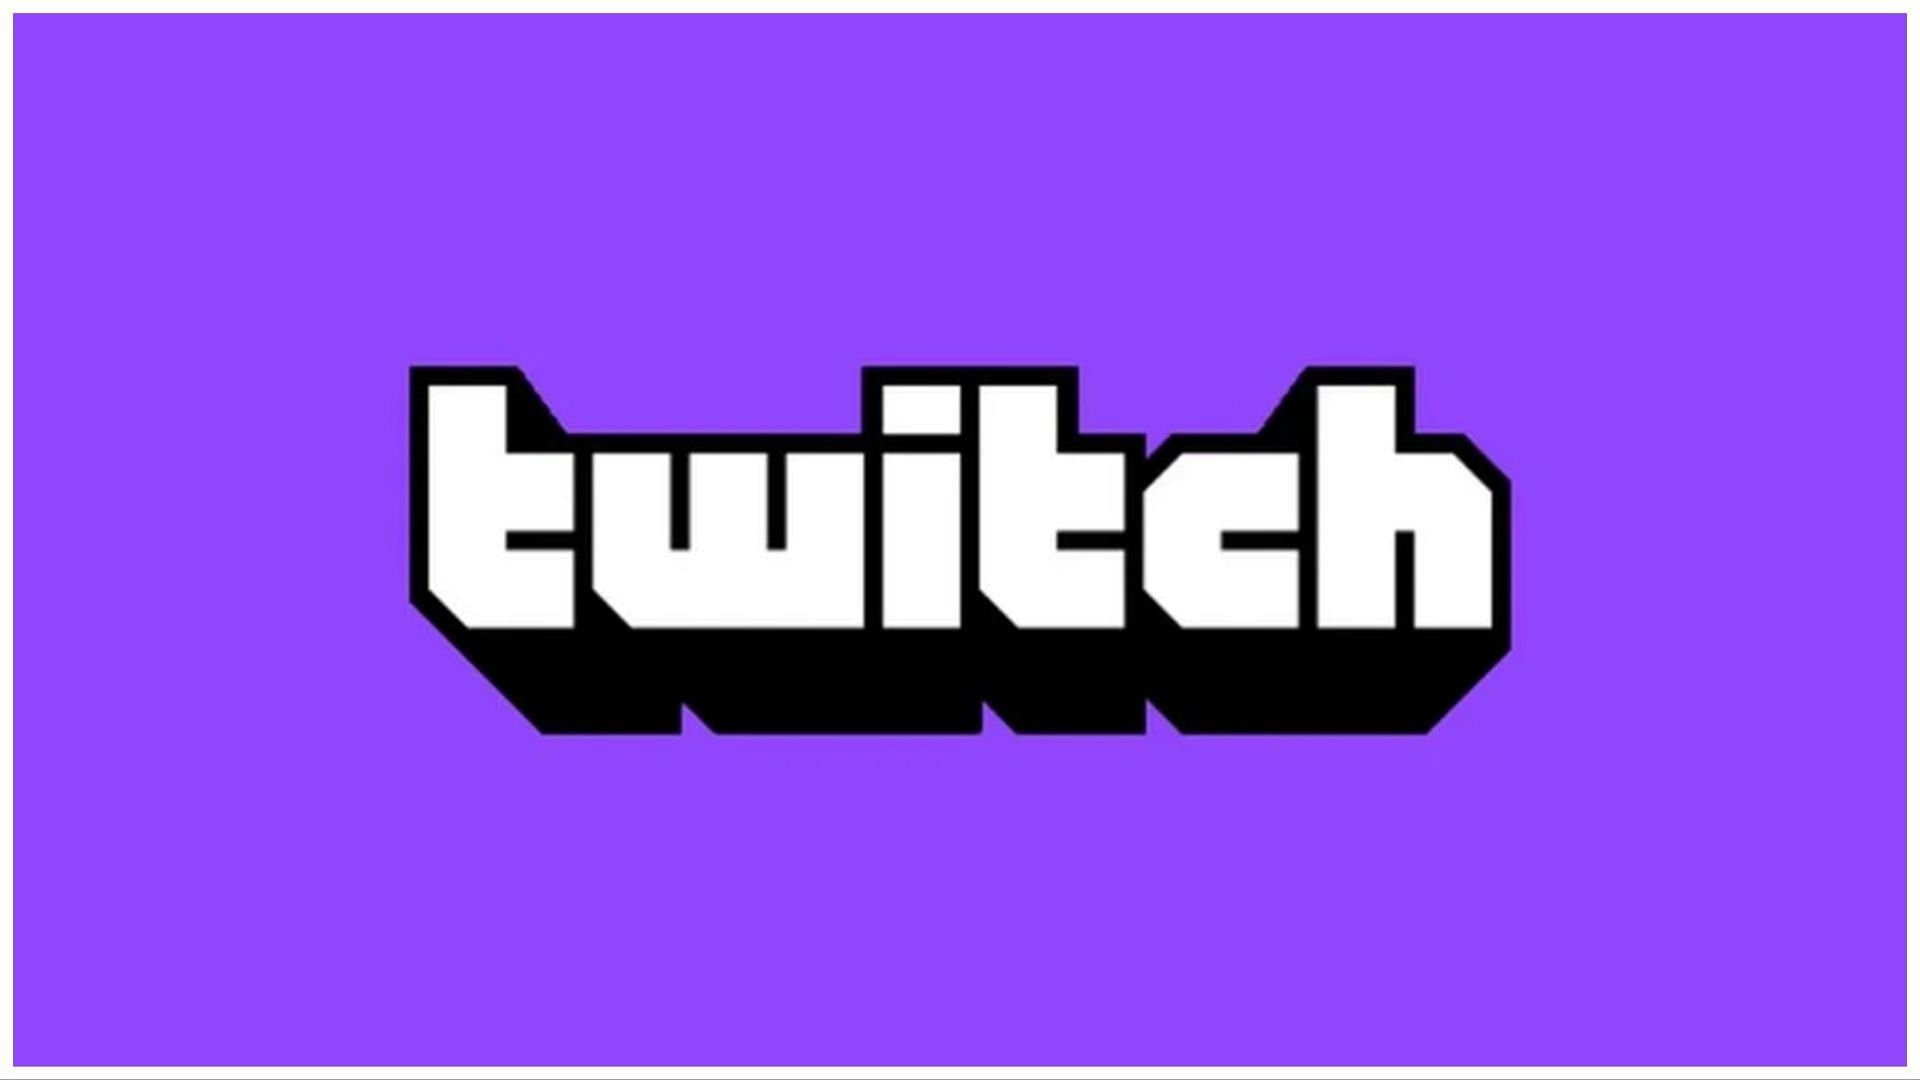 Twitch has announced its plans to roll out a new feature similar to YouTube